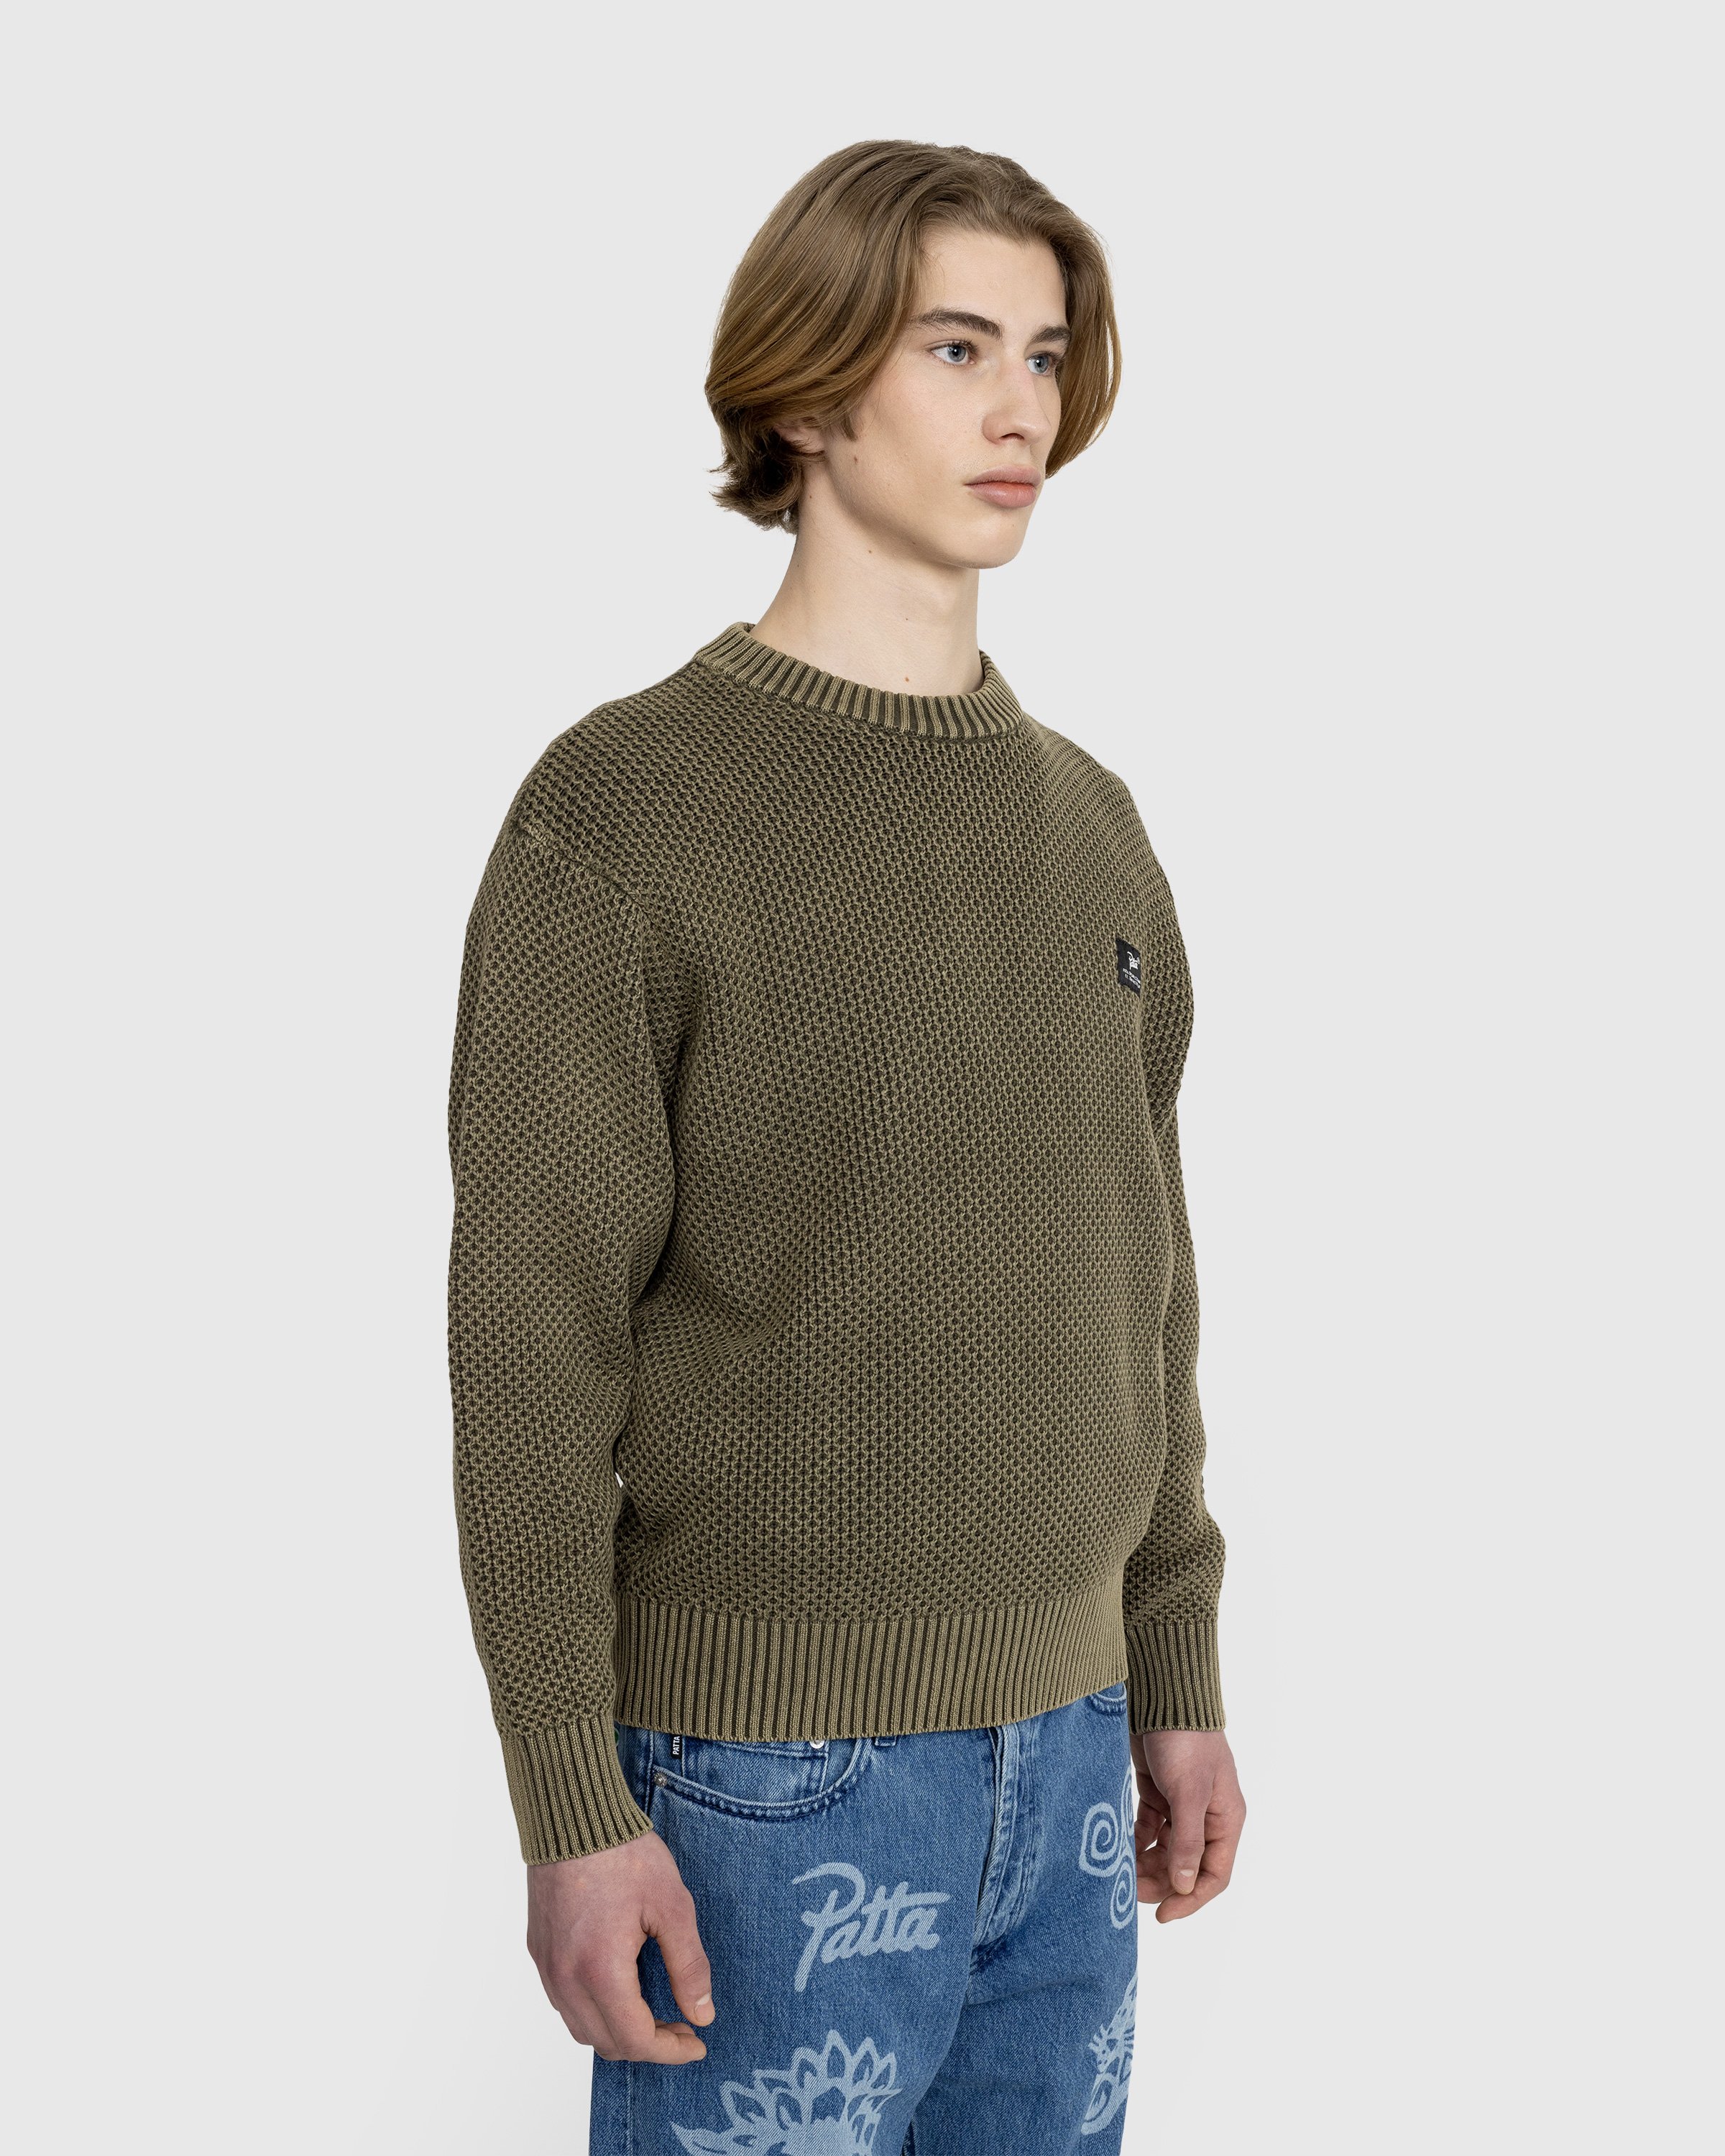 Patta - Honeycomb Knitted Sweater - Clothing - Brown - Image 4